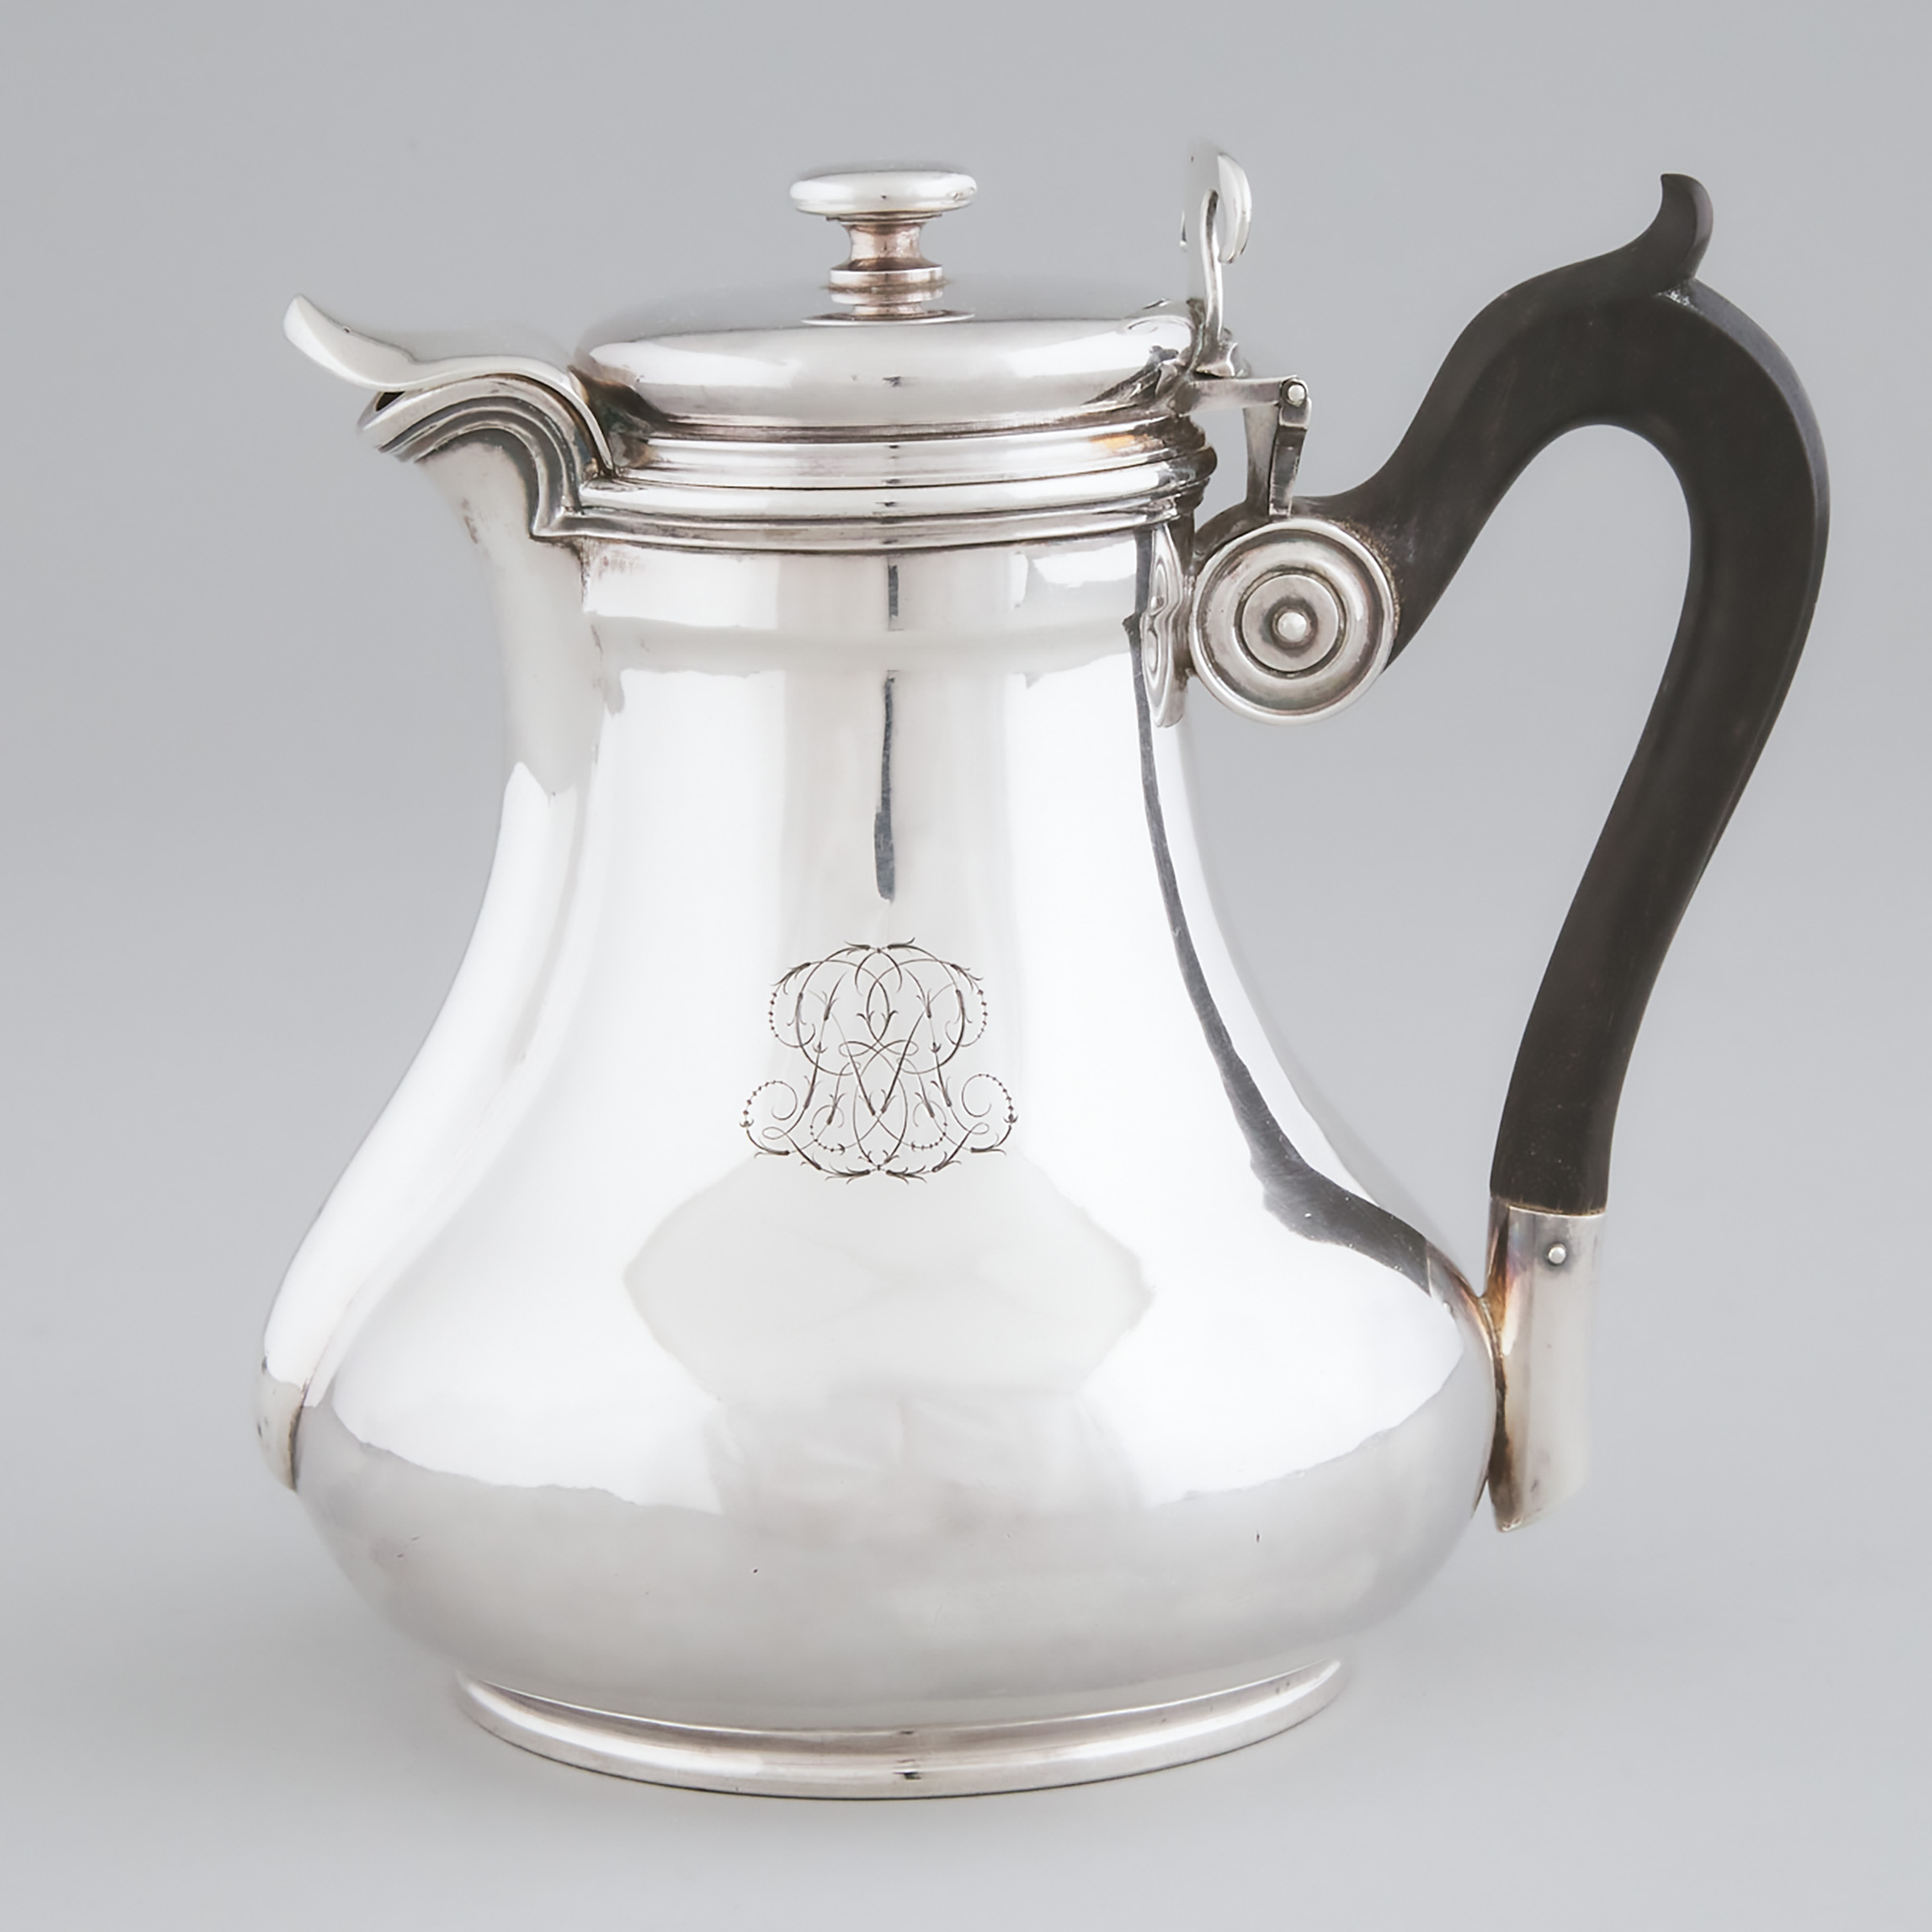 French Silver Hot Water Pot, Charles Harleux, Paris, late 19th century